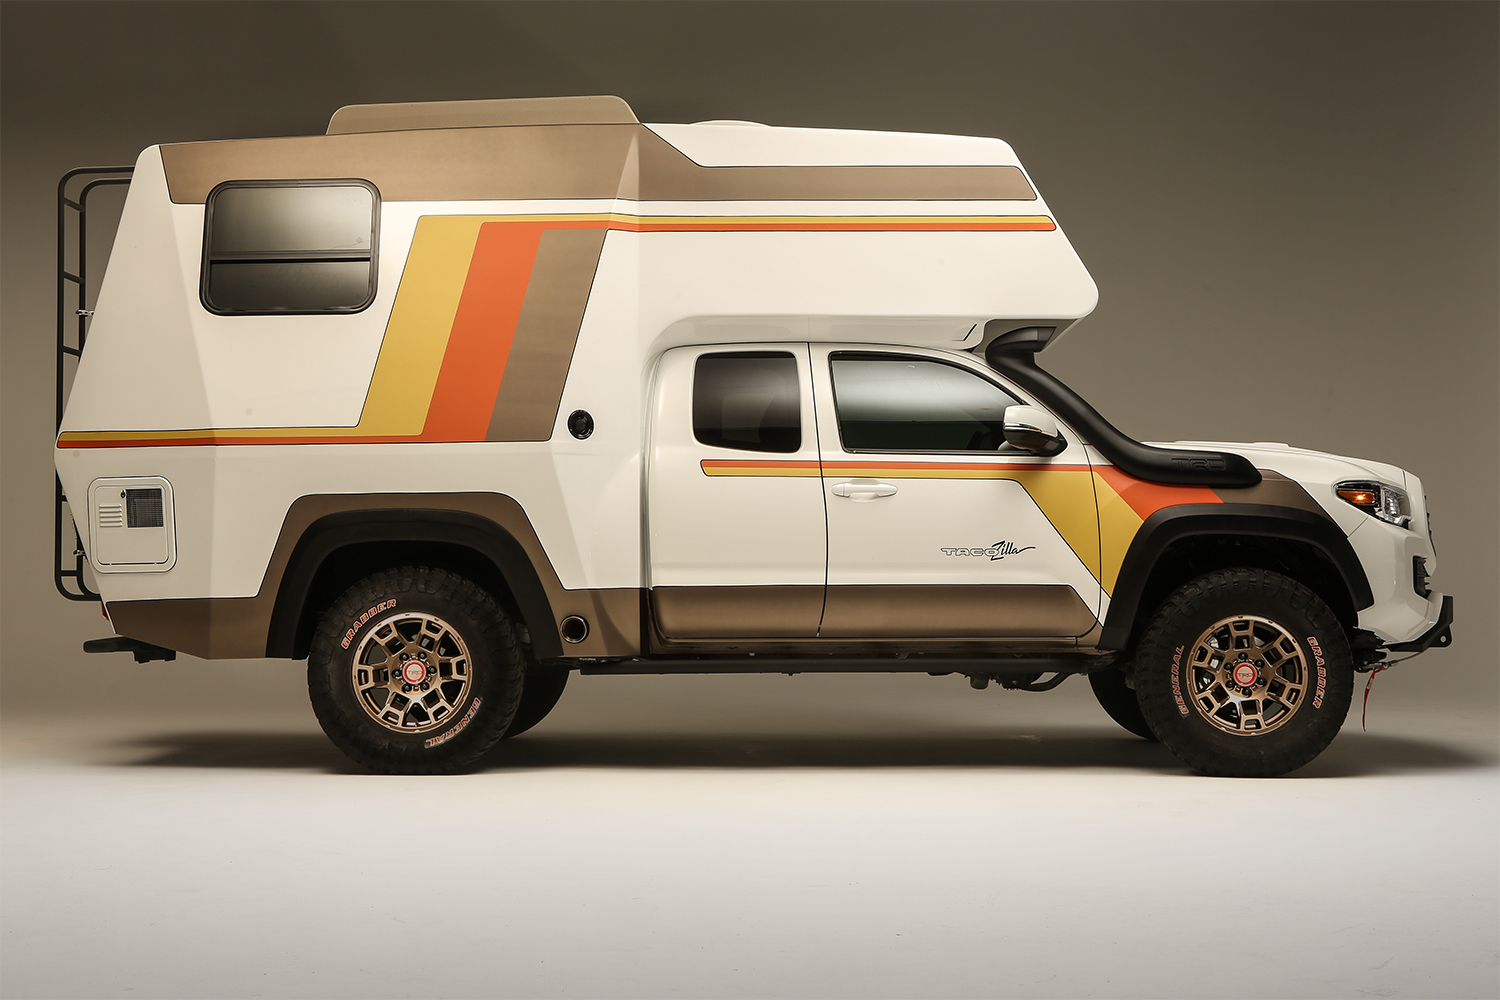 The side profile of the Toyota Tacozilla Tacoma Camper built for SEMA 2021. The retro overlander features a shower, kitchen and tons of sleeping space.